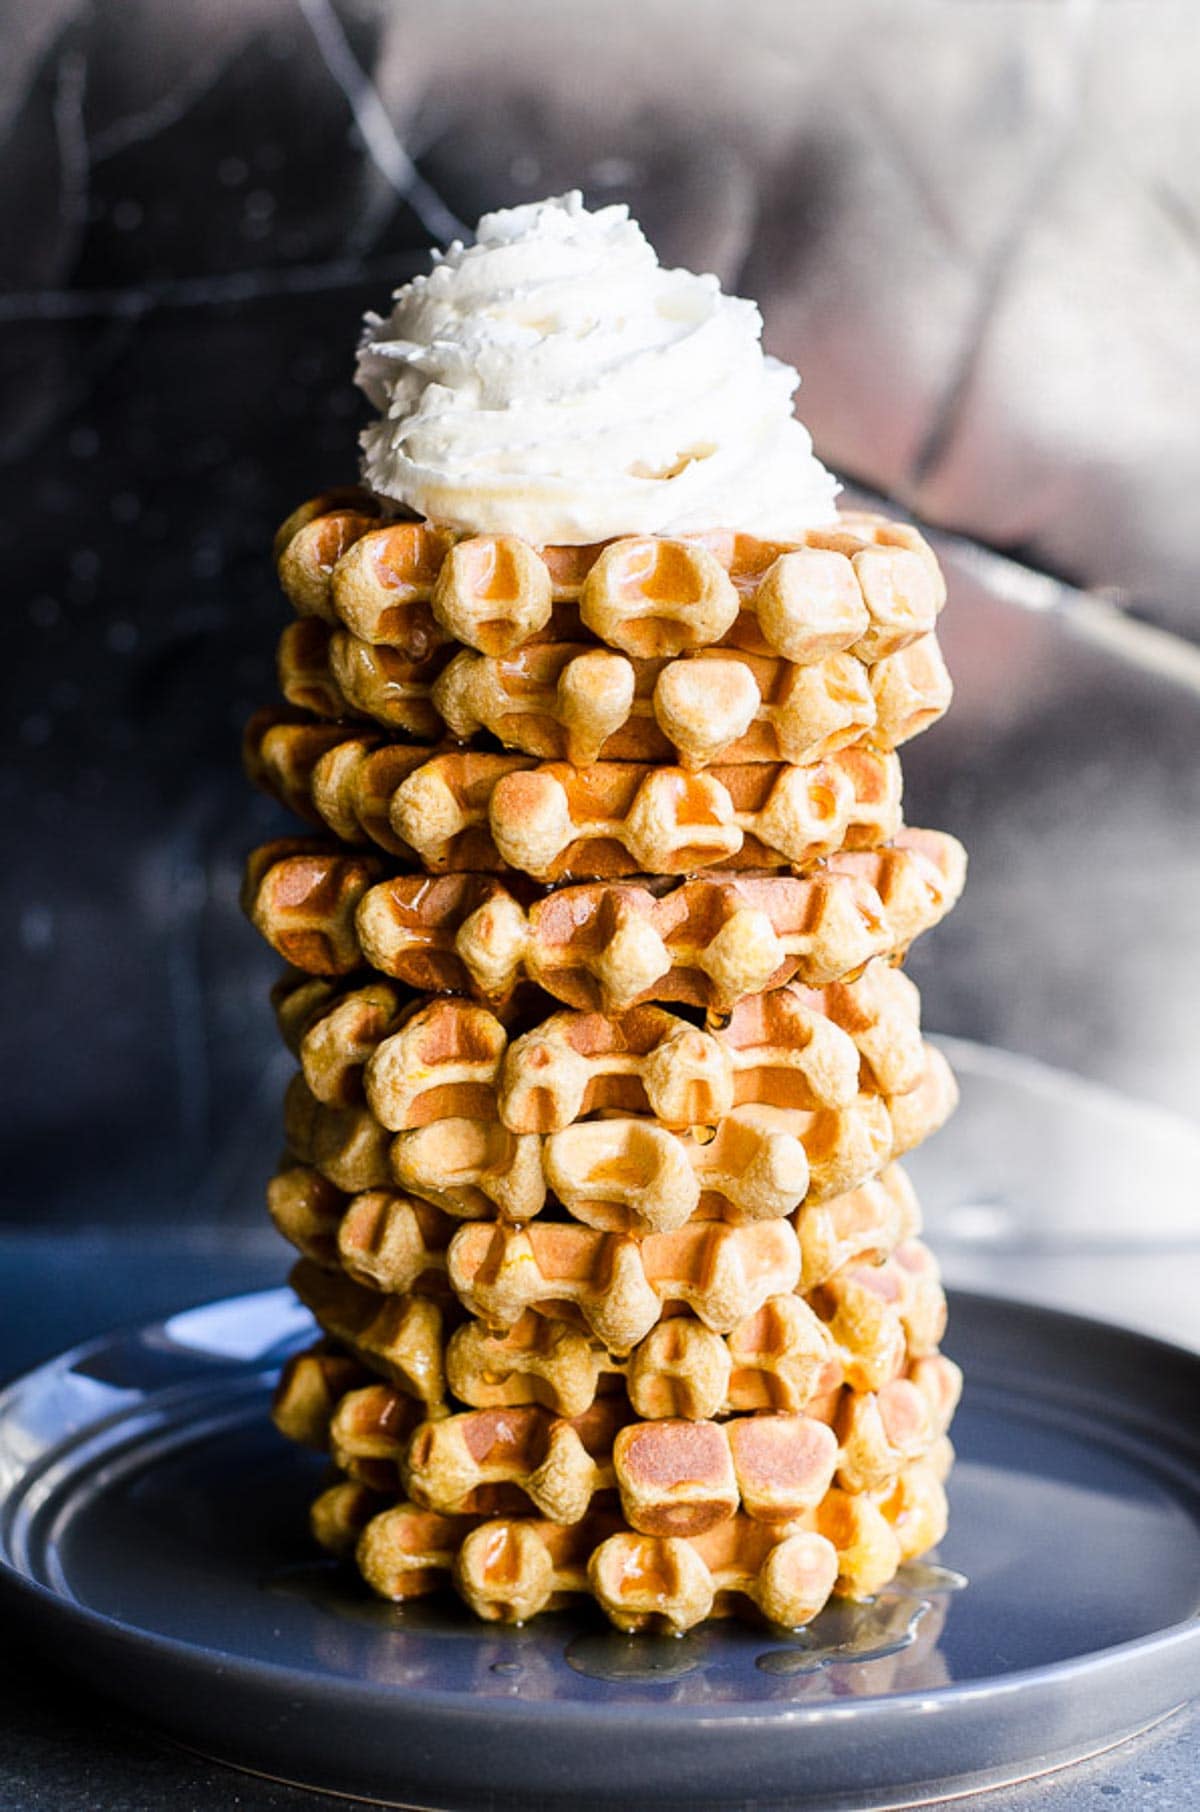 A high stack of protein waffles topped with whipped cream.